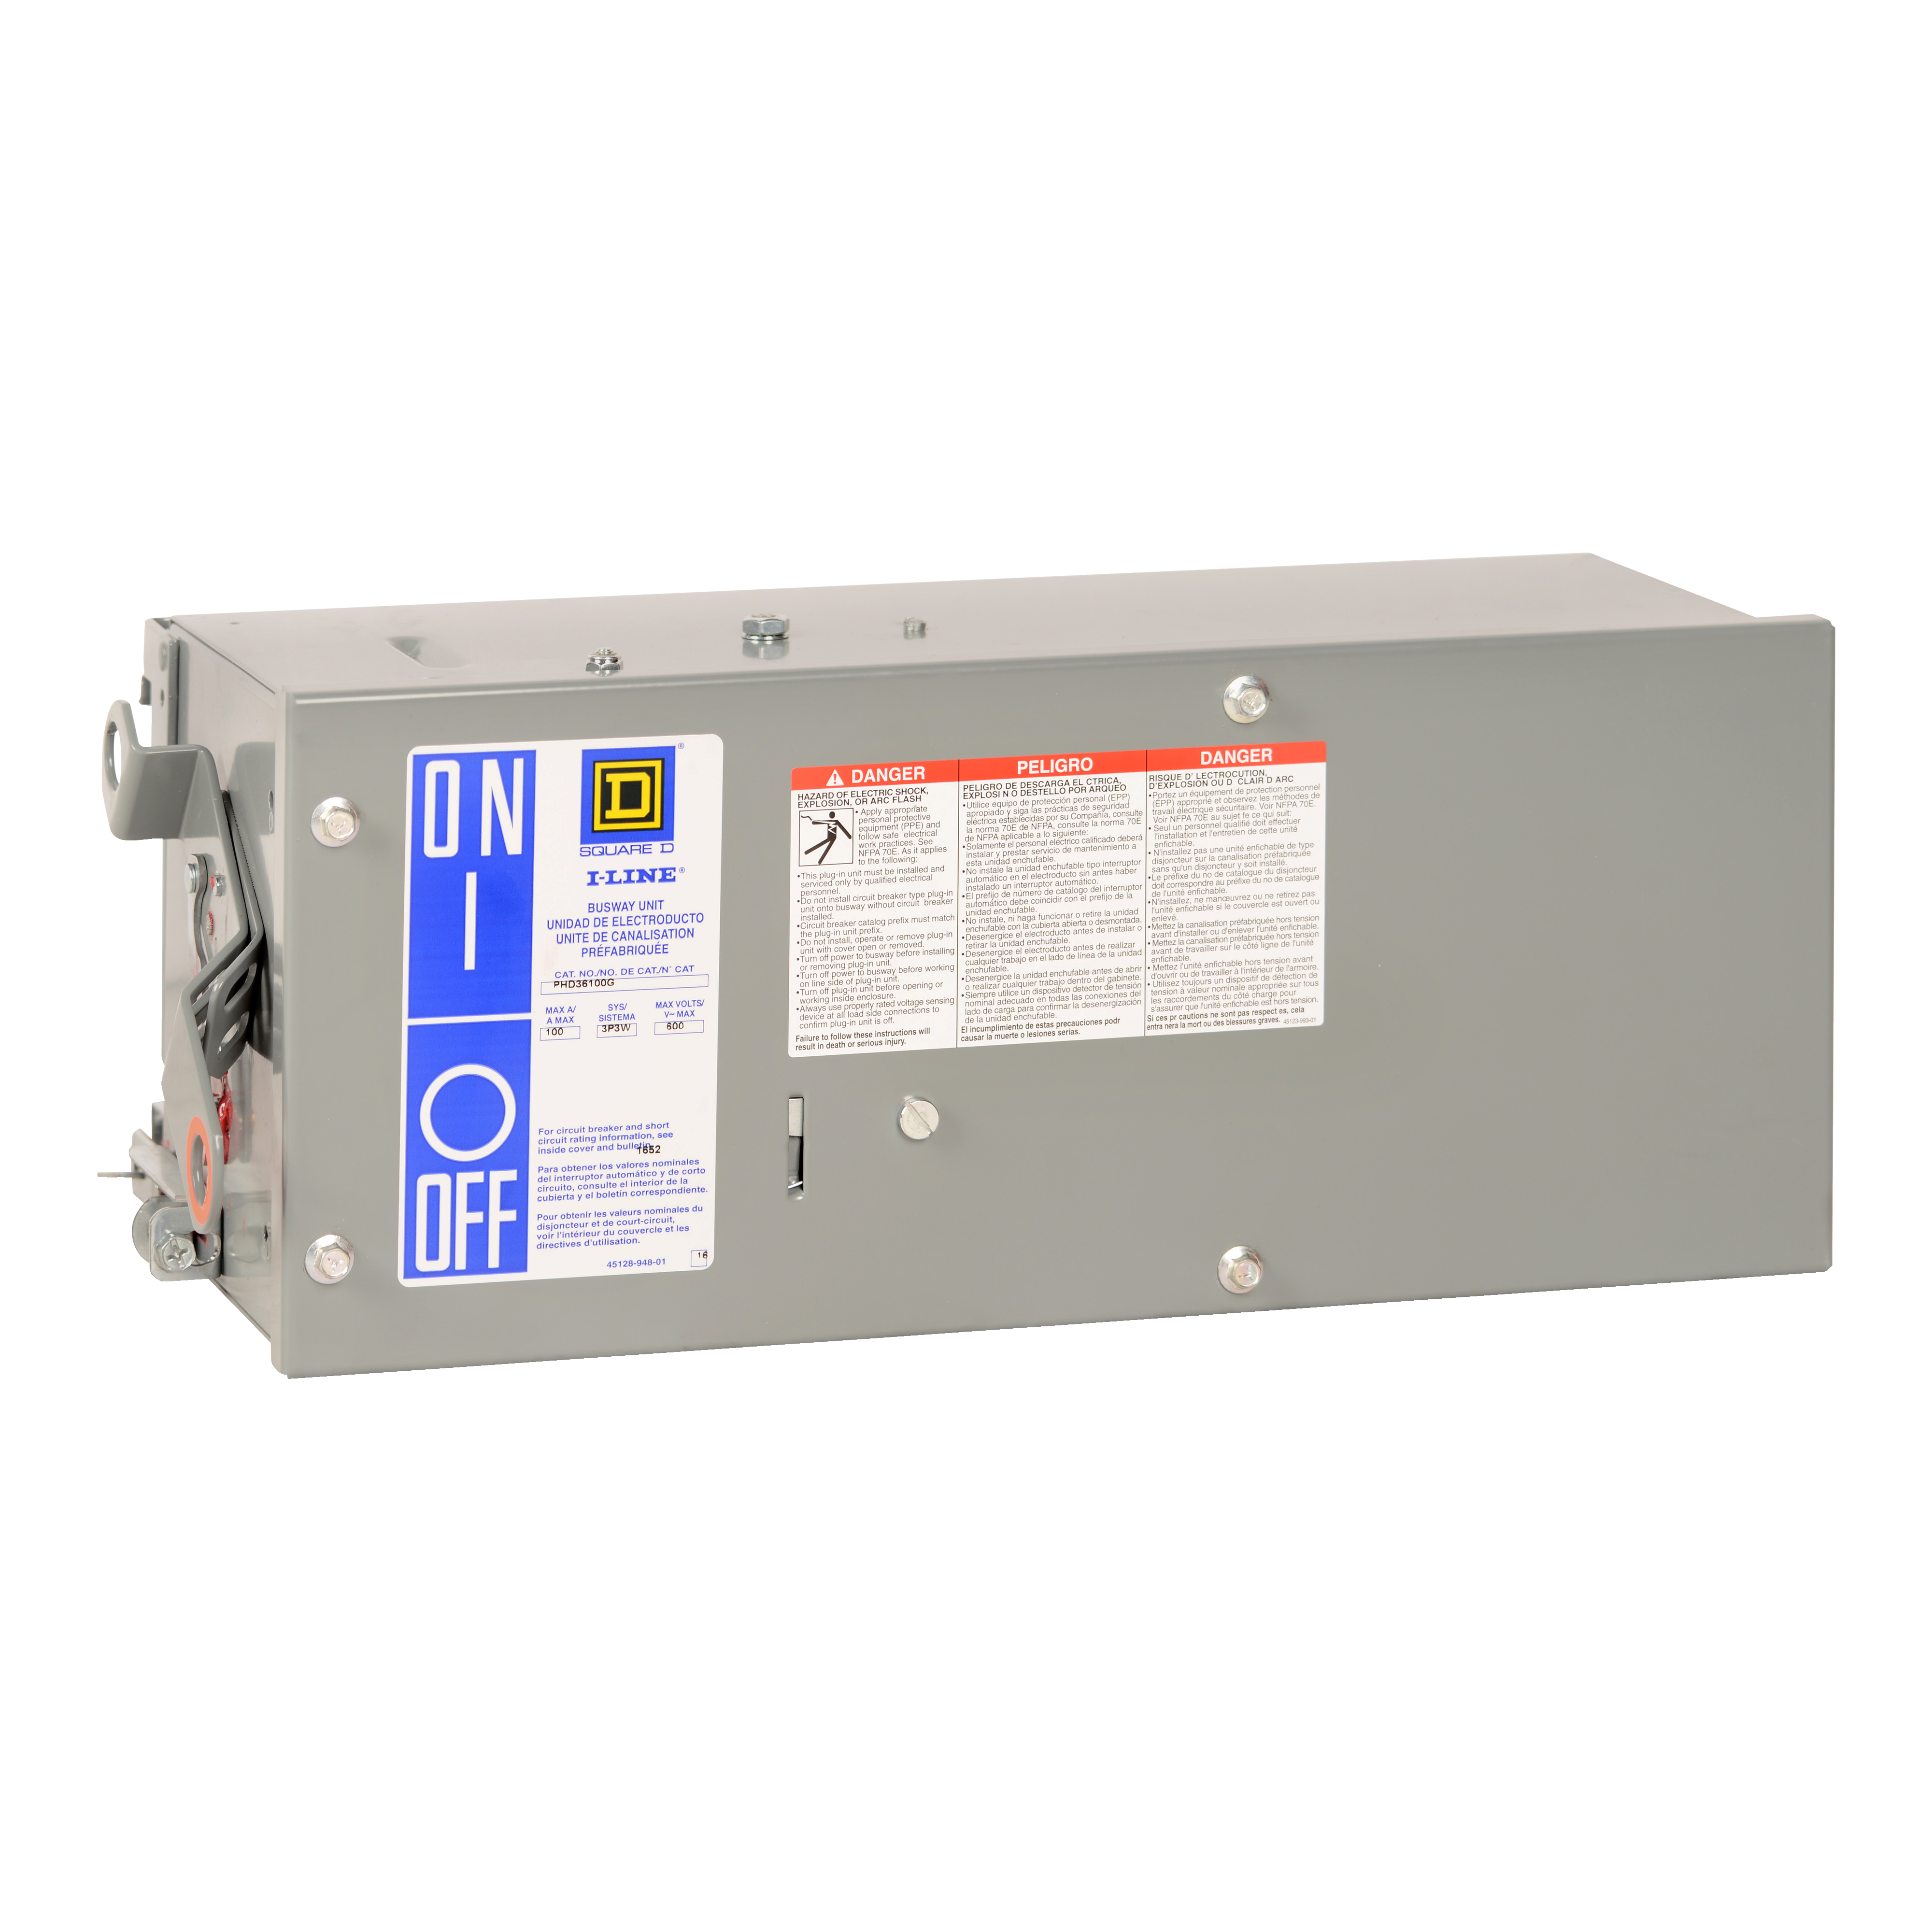 Plug-in unit, I-Line Busway, H-frame, 20A, 3 phase, 3 wire, 600VAC, 25kA, ground